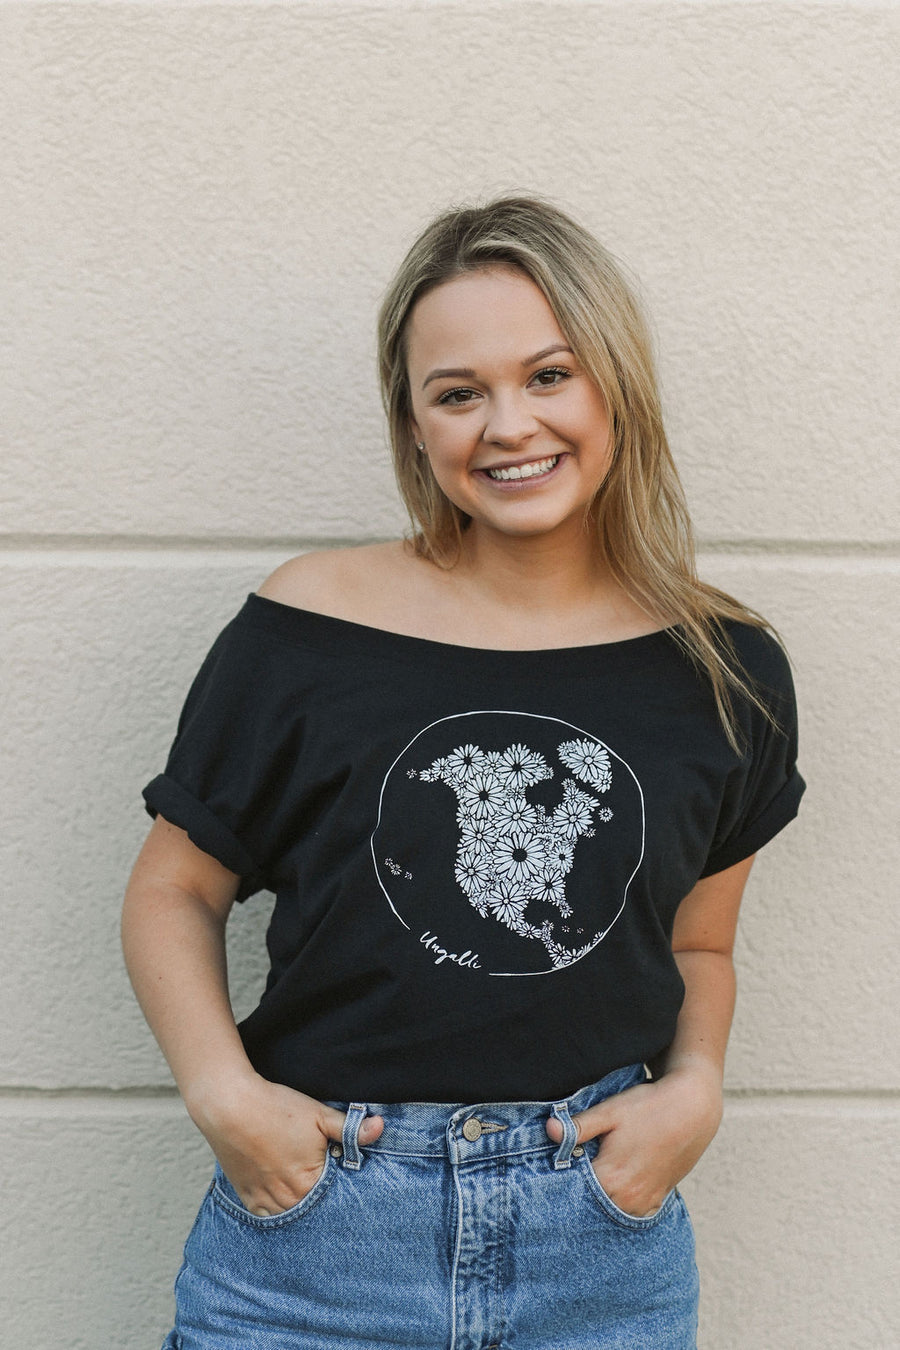 Women's black ethically sourced off the shoulder t-shirt with floral map design on front